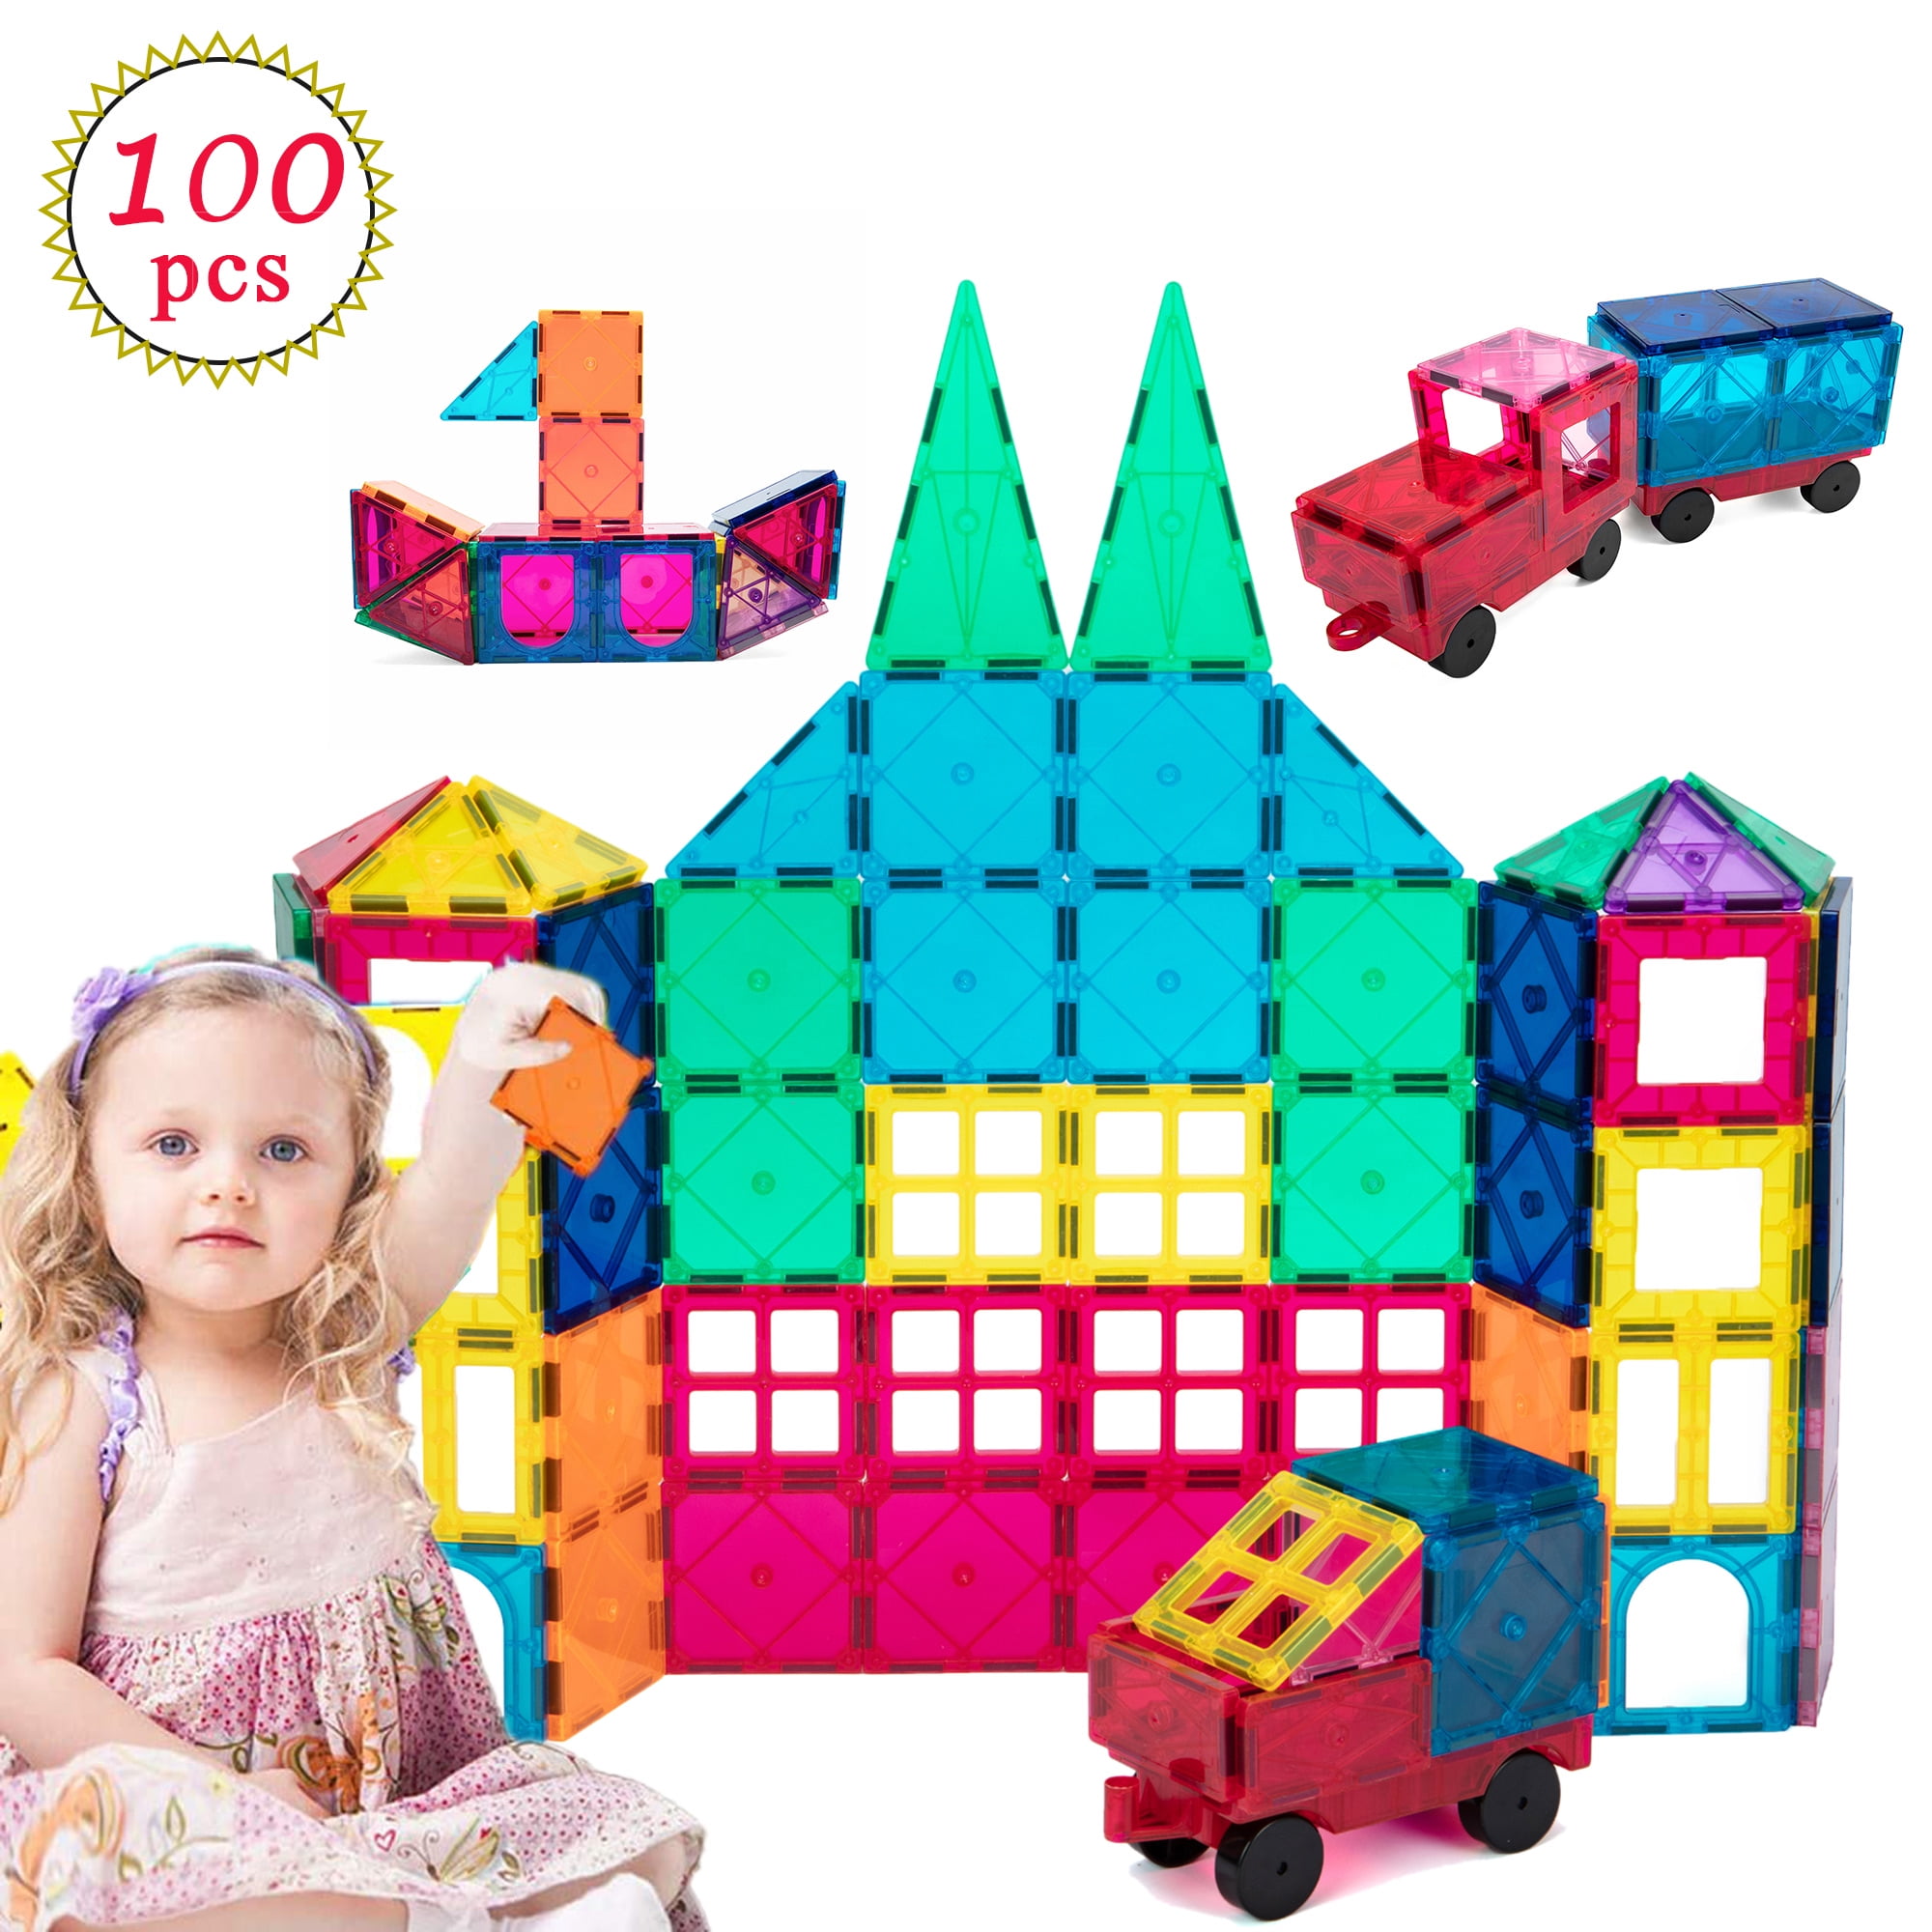 Educational Magnetic Construction Building Blocks Contains 18squares&24triangles 